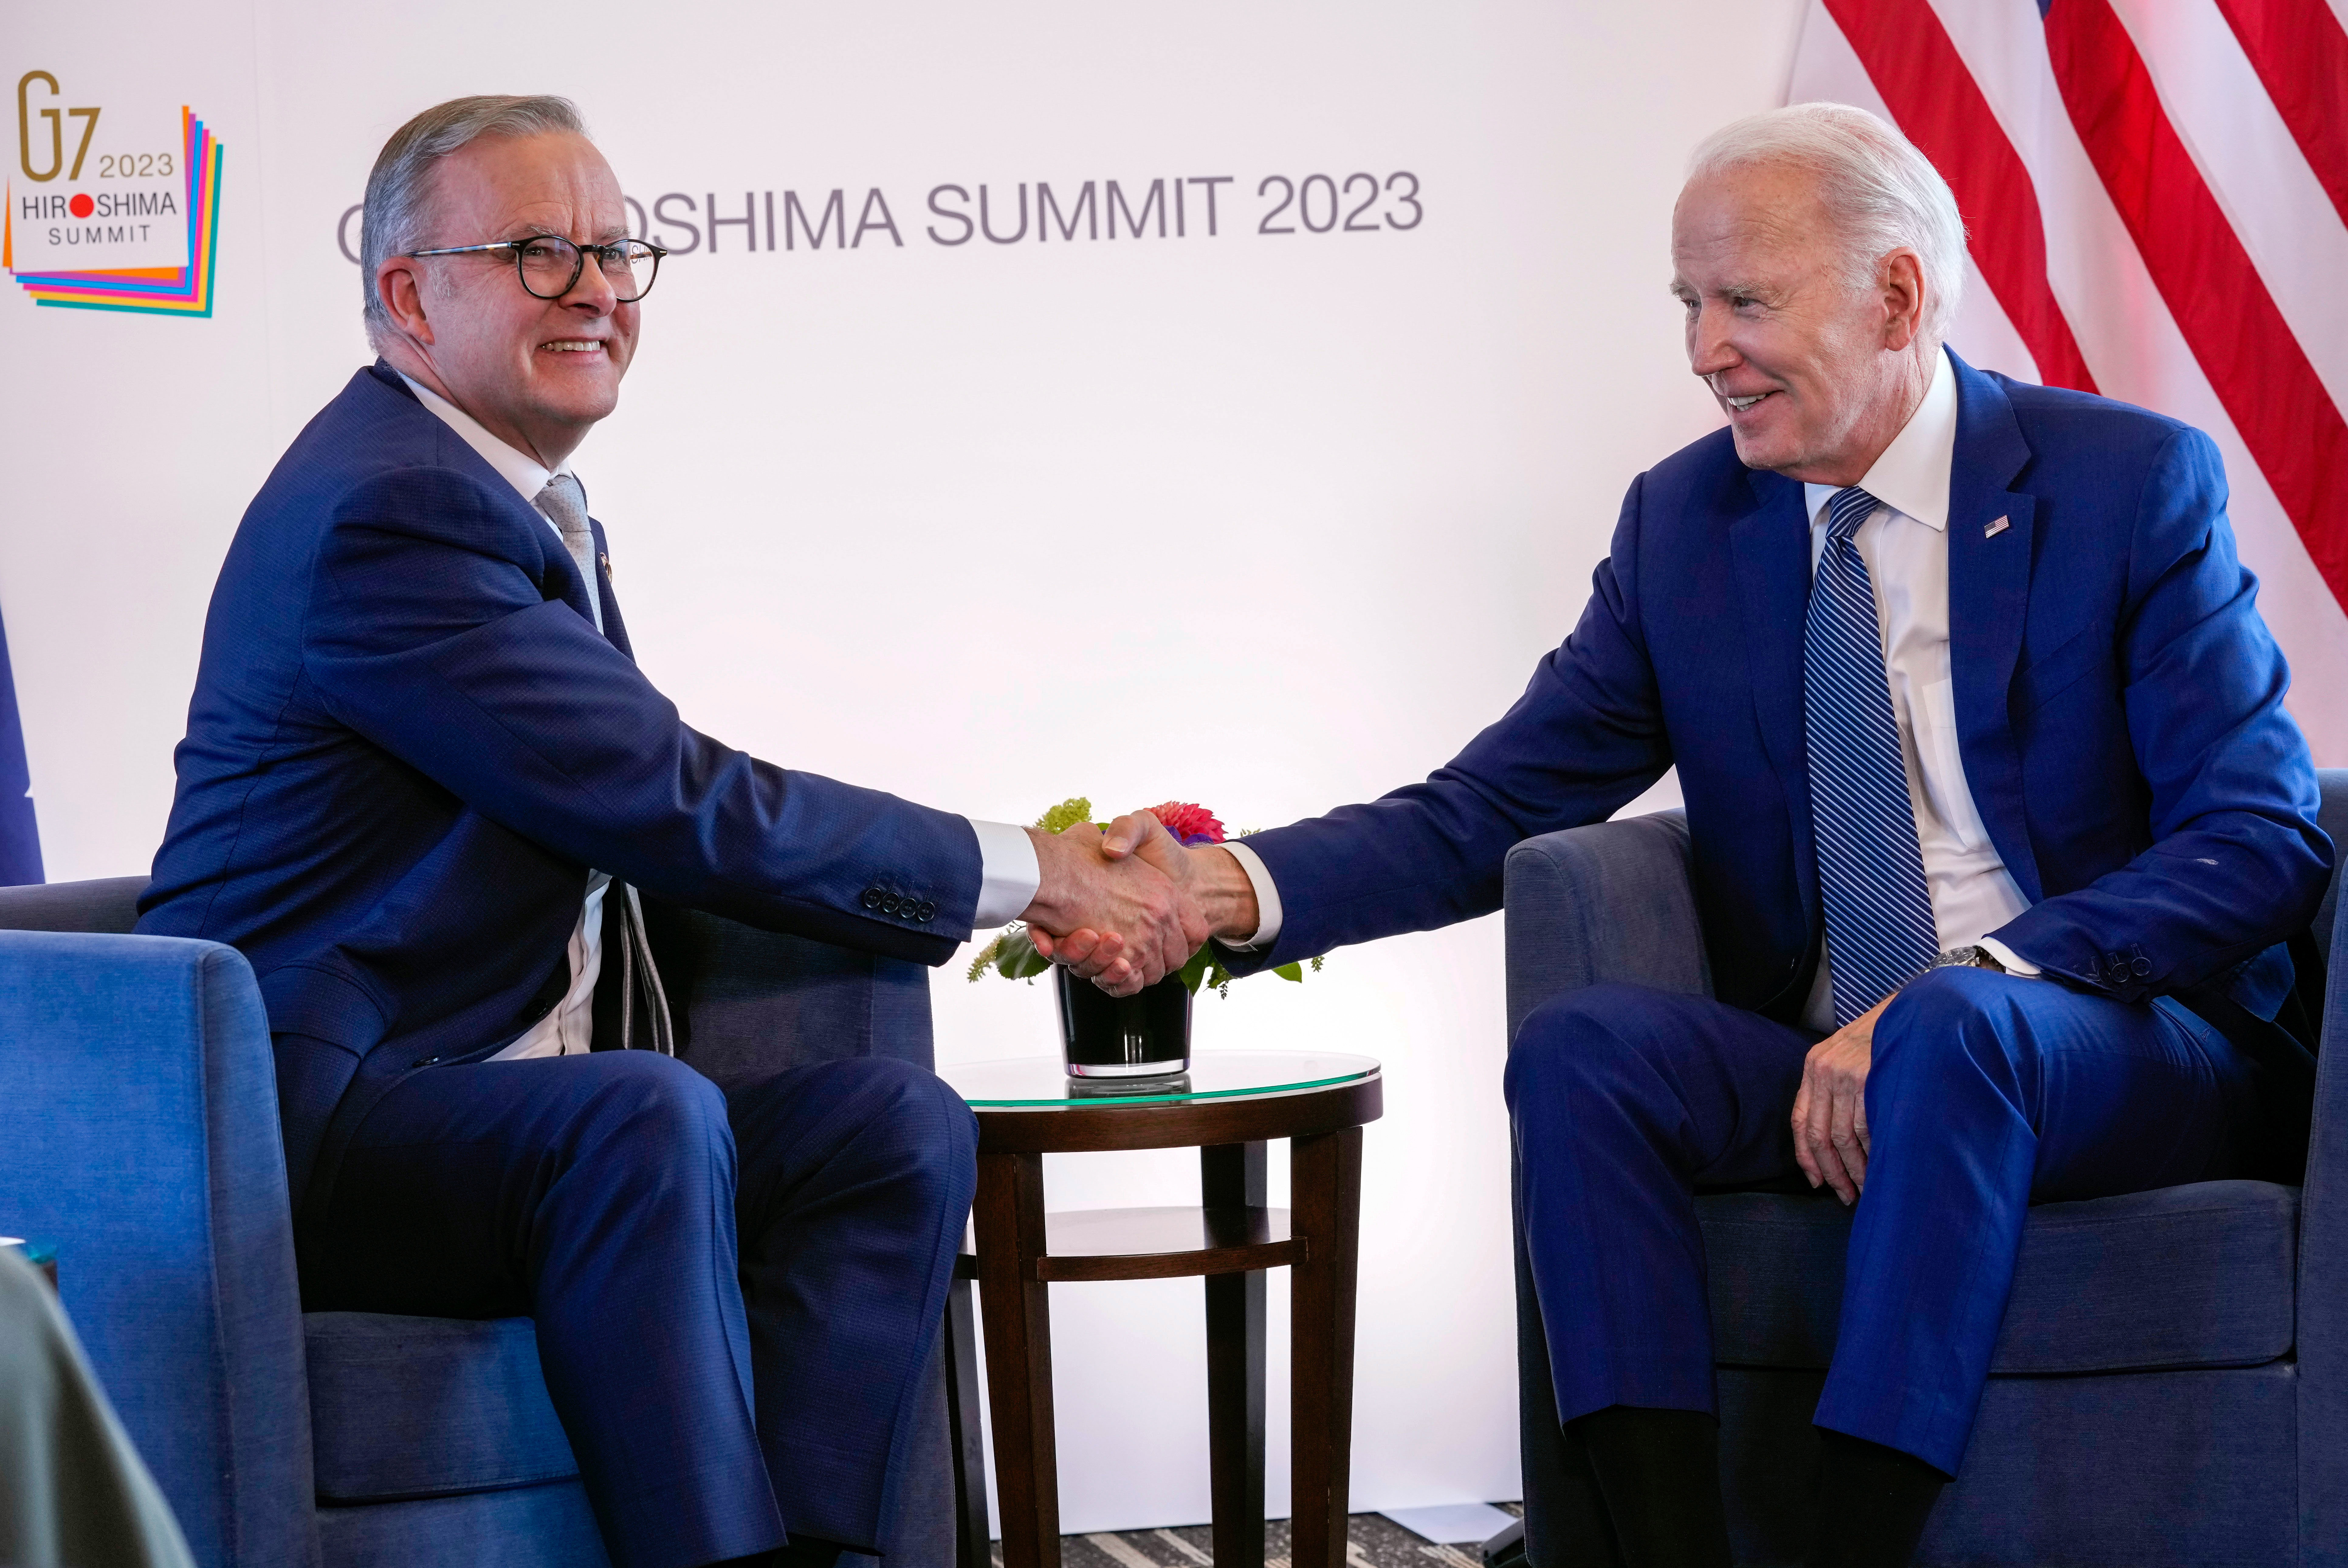 US President Joe Biden, right, and Australia's Prime Minister Anthony Albanese on the sidelines of the G7 Summit in Hiroshima, Japan, Saturday, May 20, 2023.